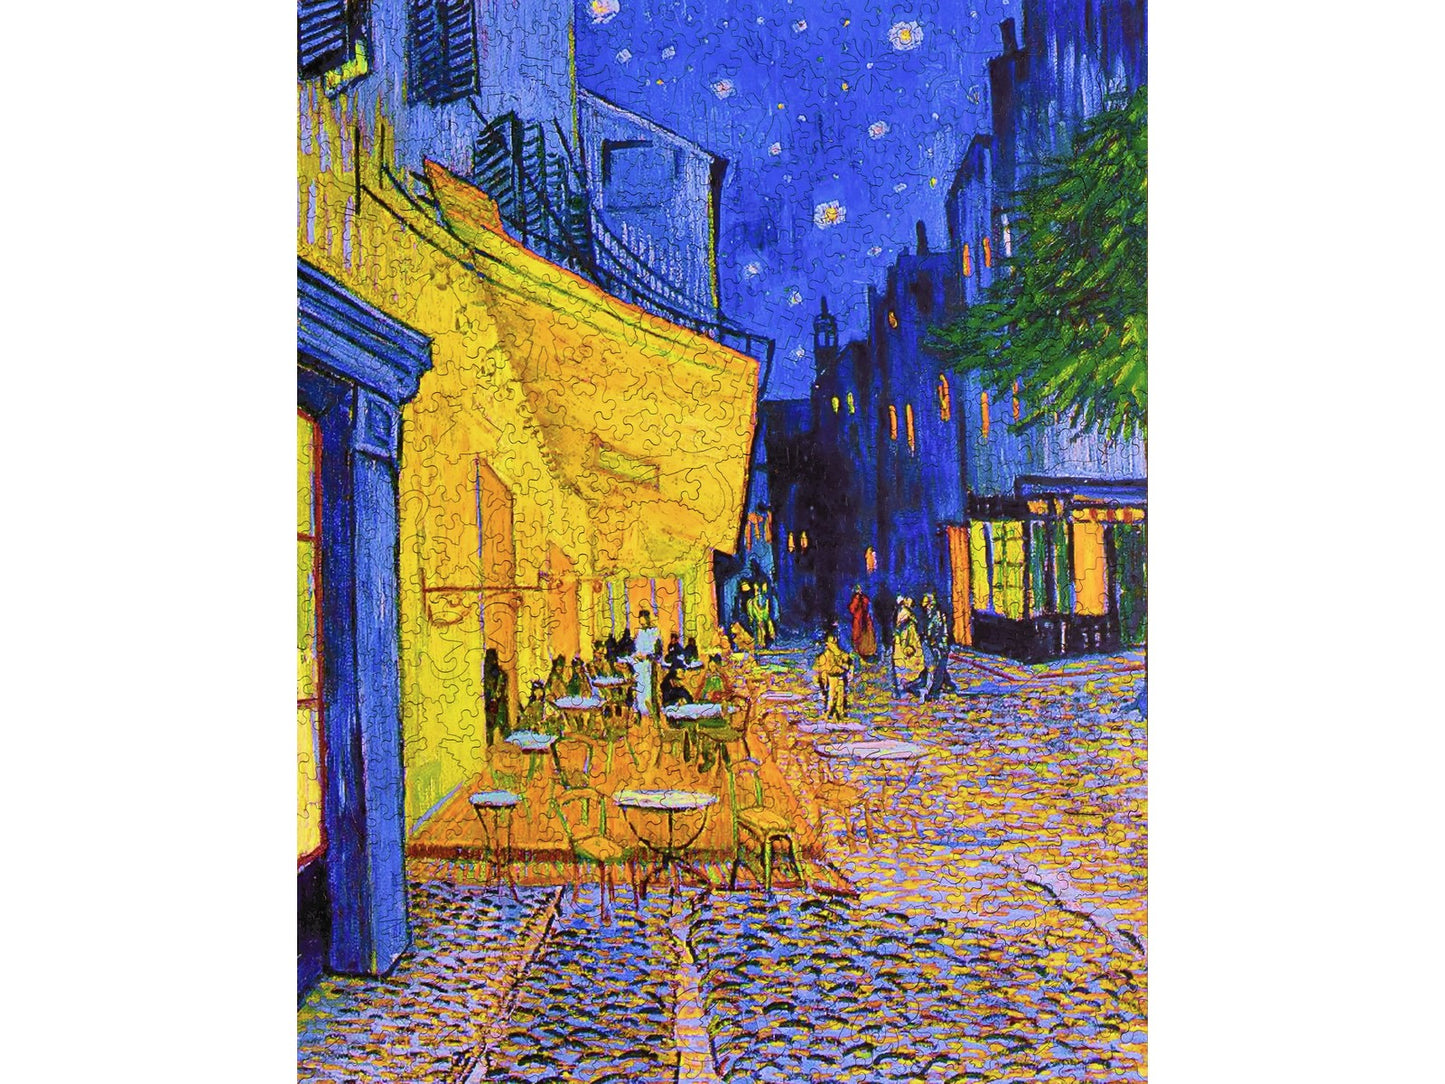 The front of the puzzle, cafe terrace, which shows a cafe at night on a city street.